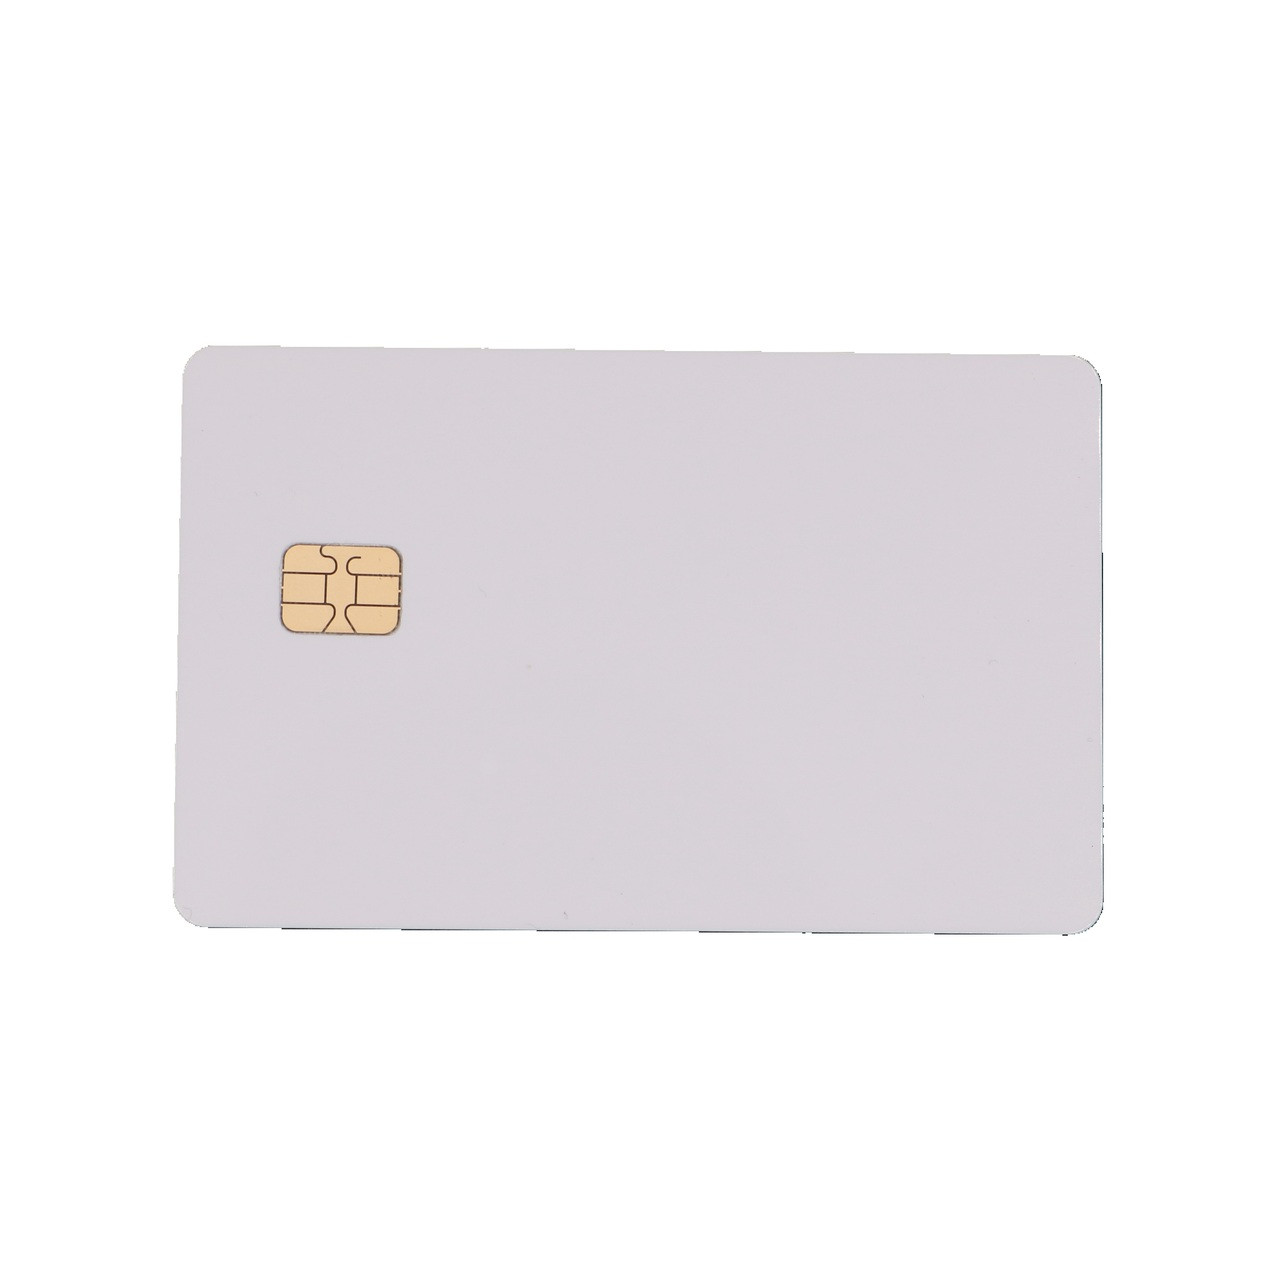 5 Pcs Safety ISO PVC SLE4442 Chip Blank Contact Smart IC Card for Asset Industry 